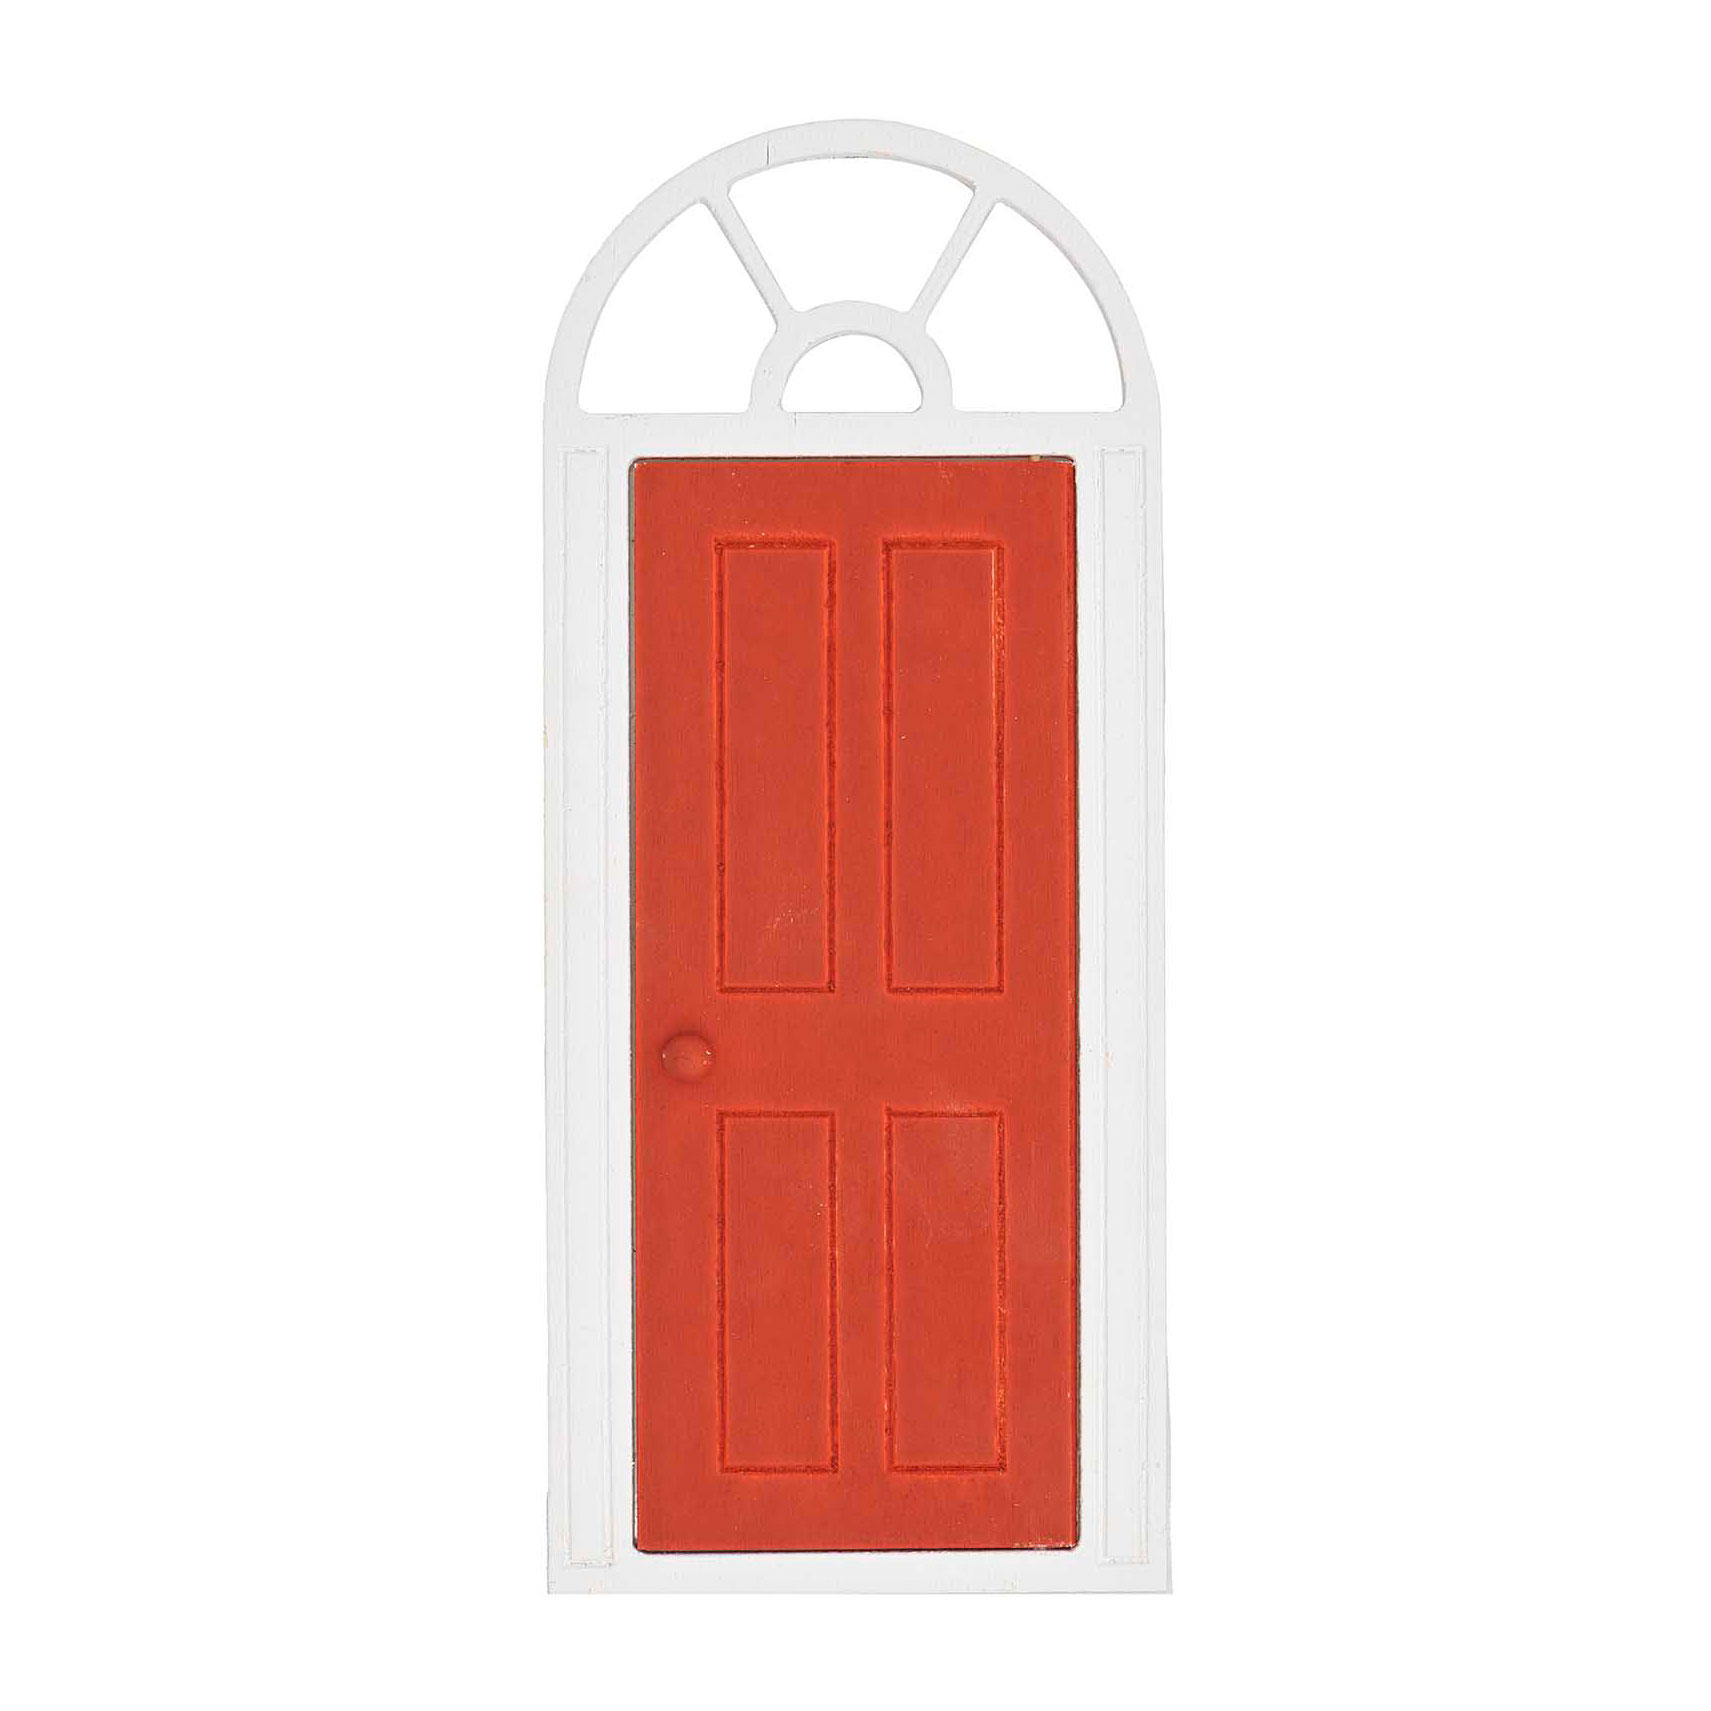 Mini Door - Arched  Window - Red & White